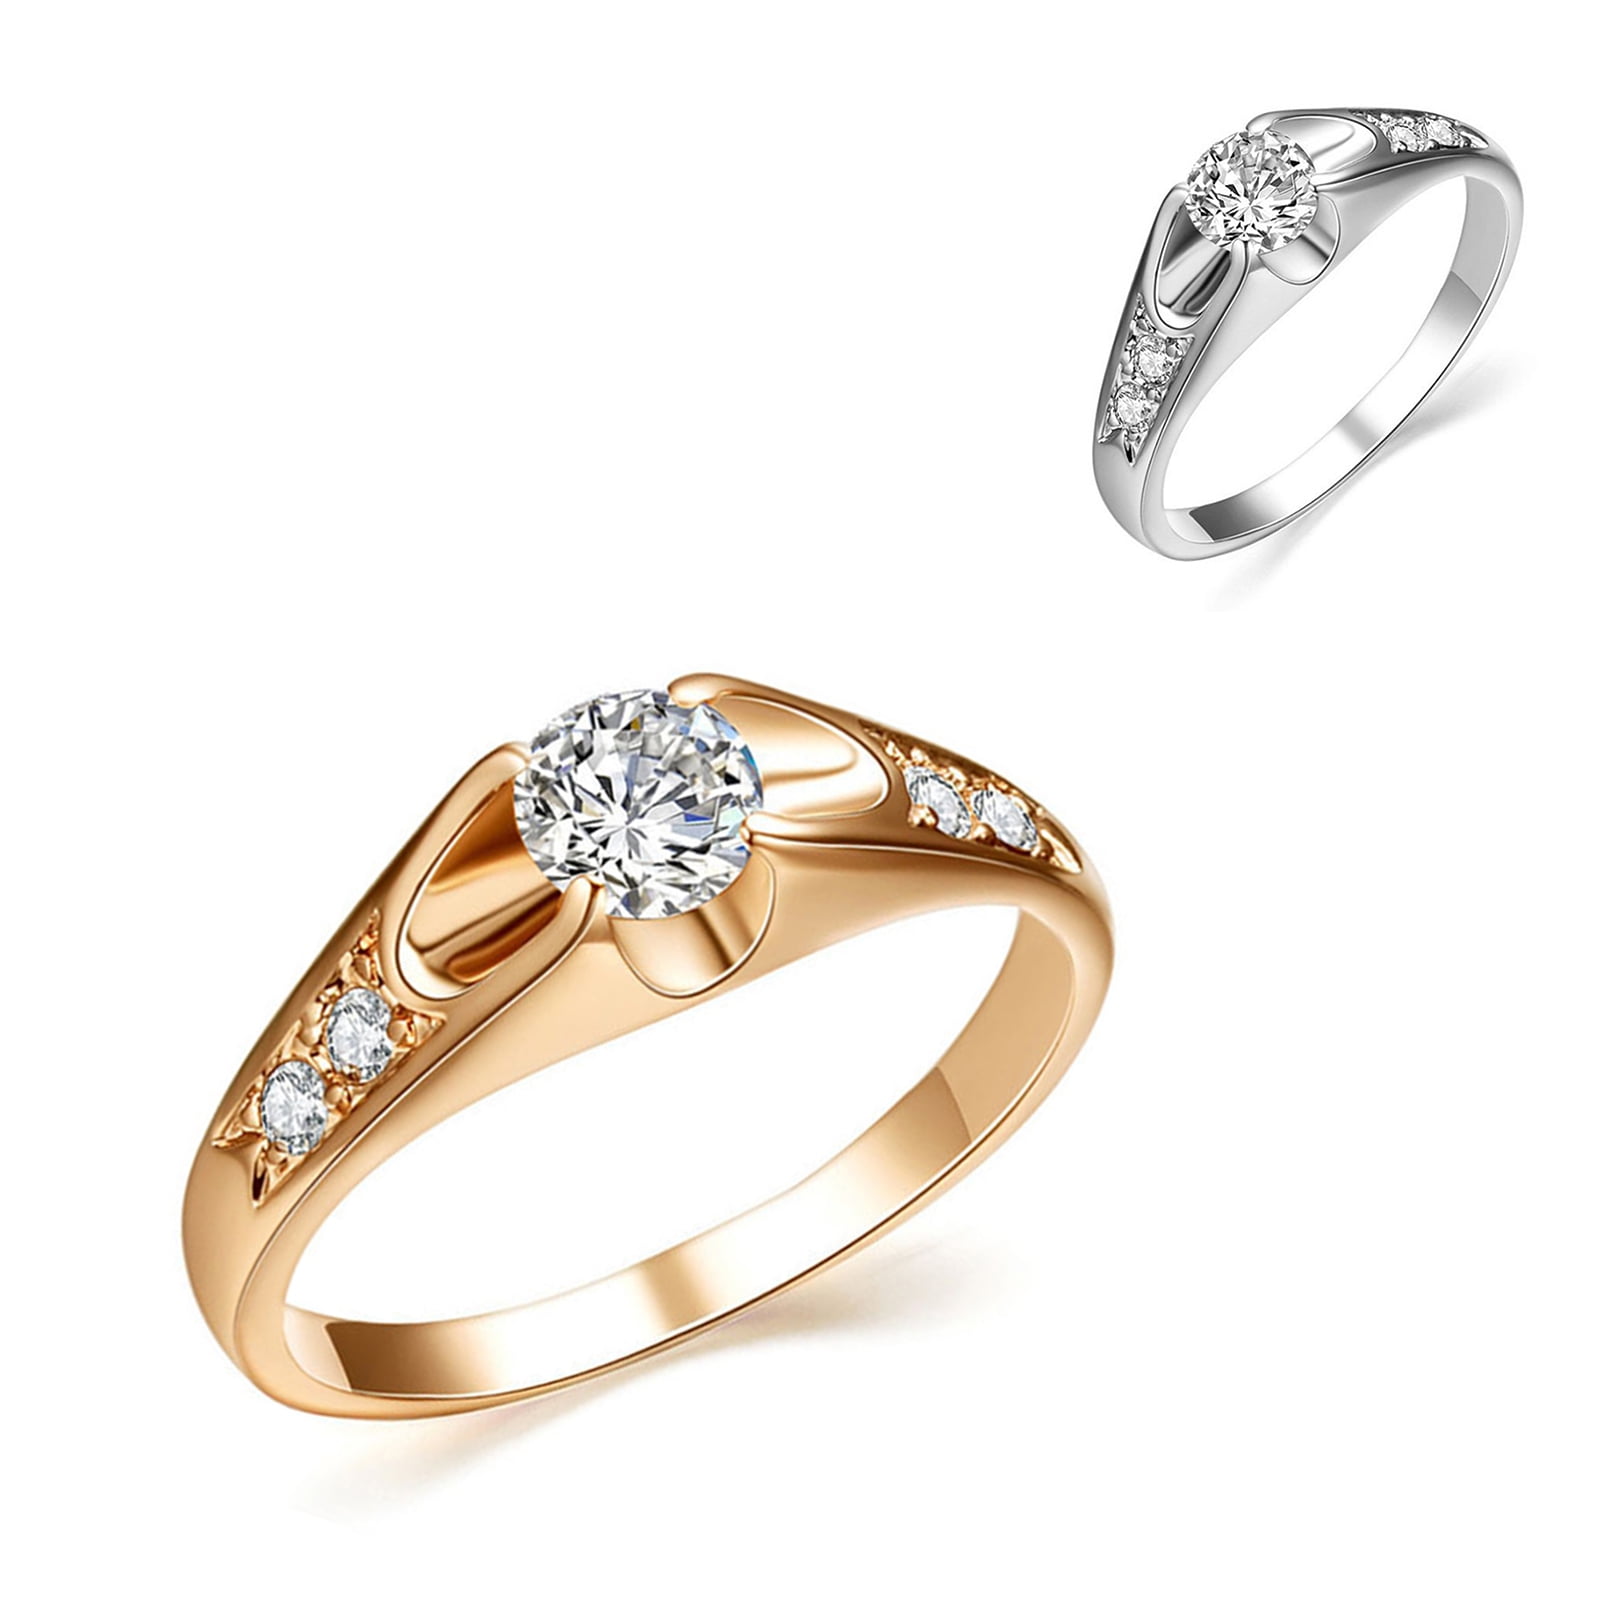 Pairing Up Gold Couple Rings